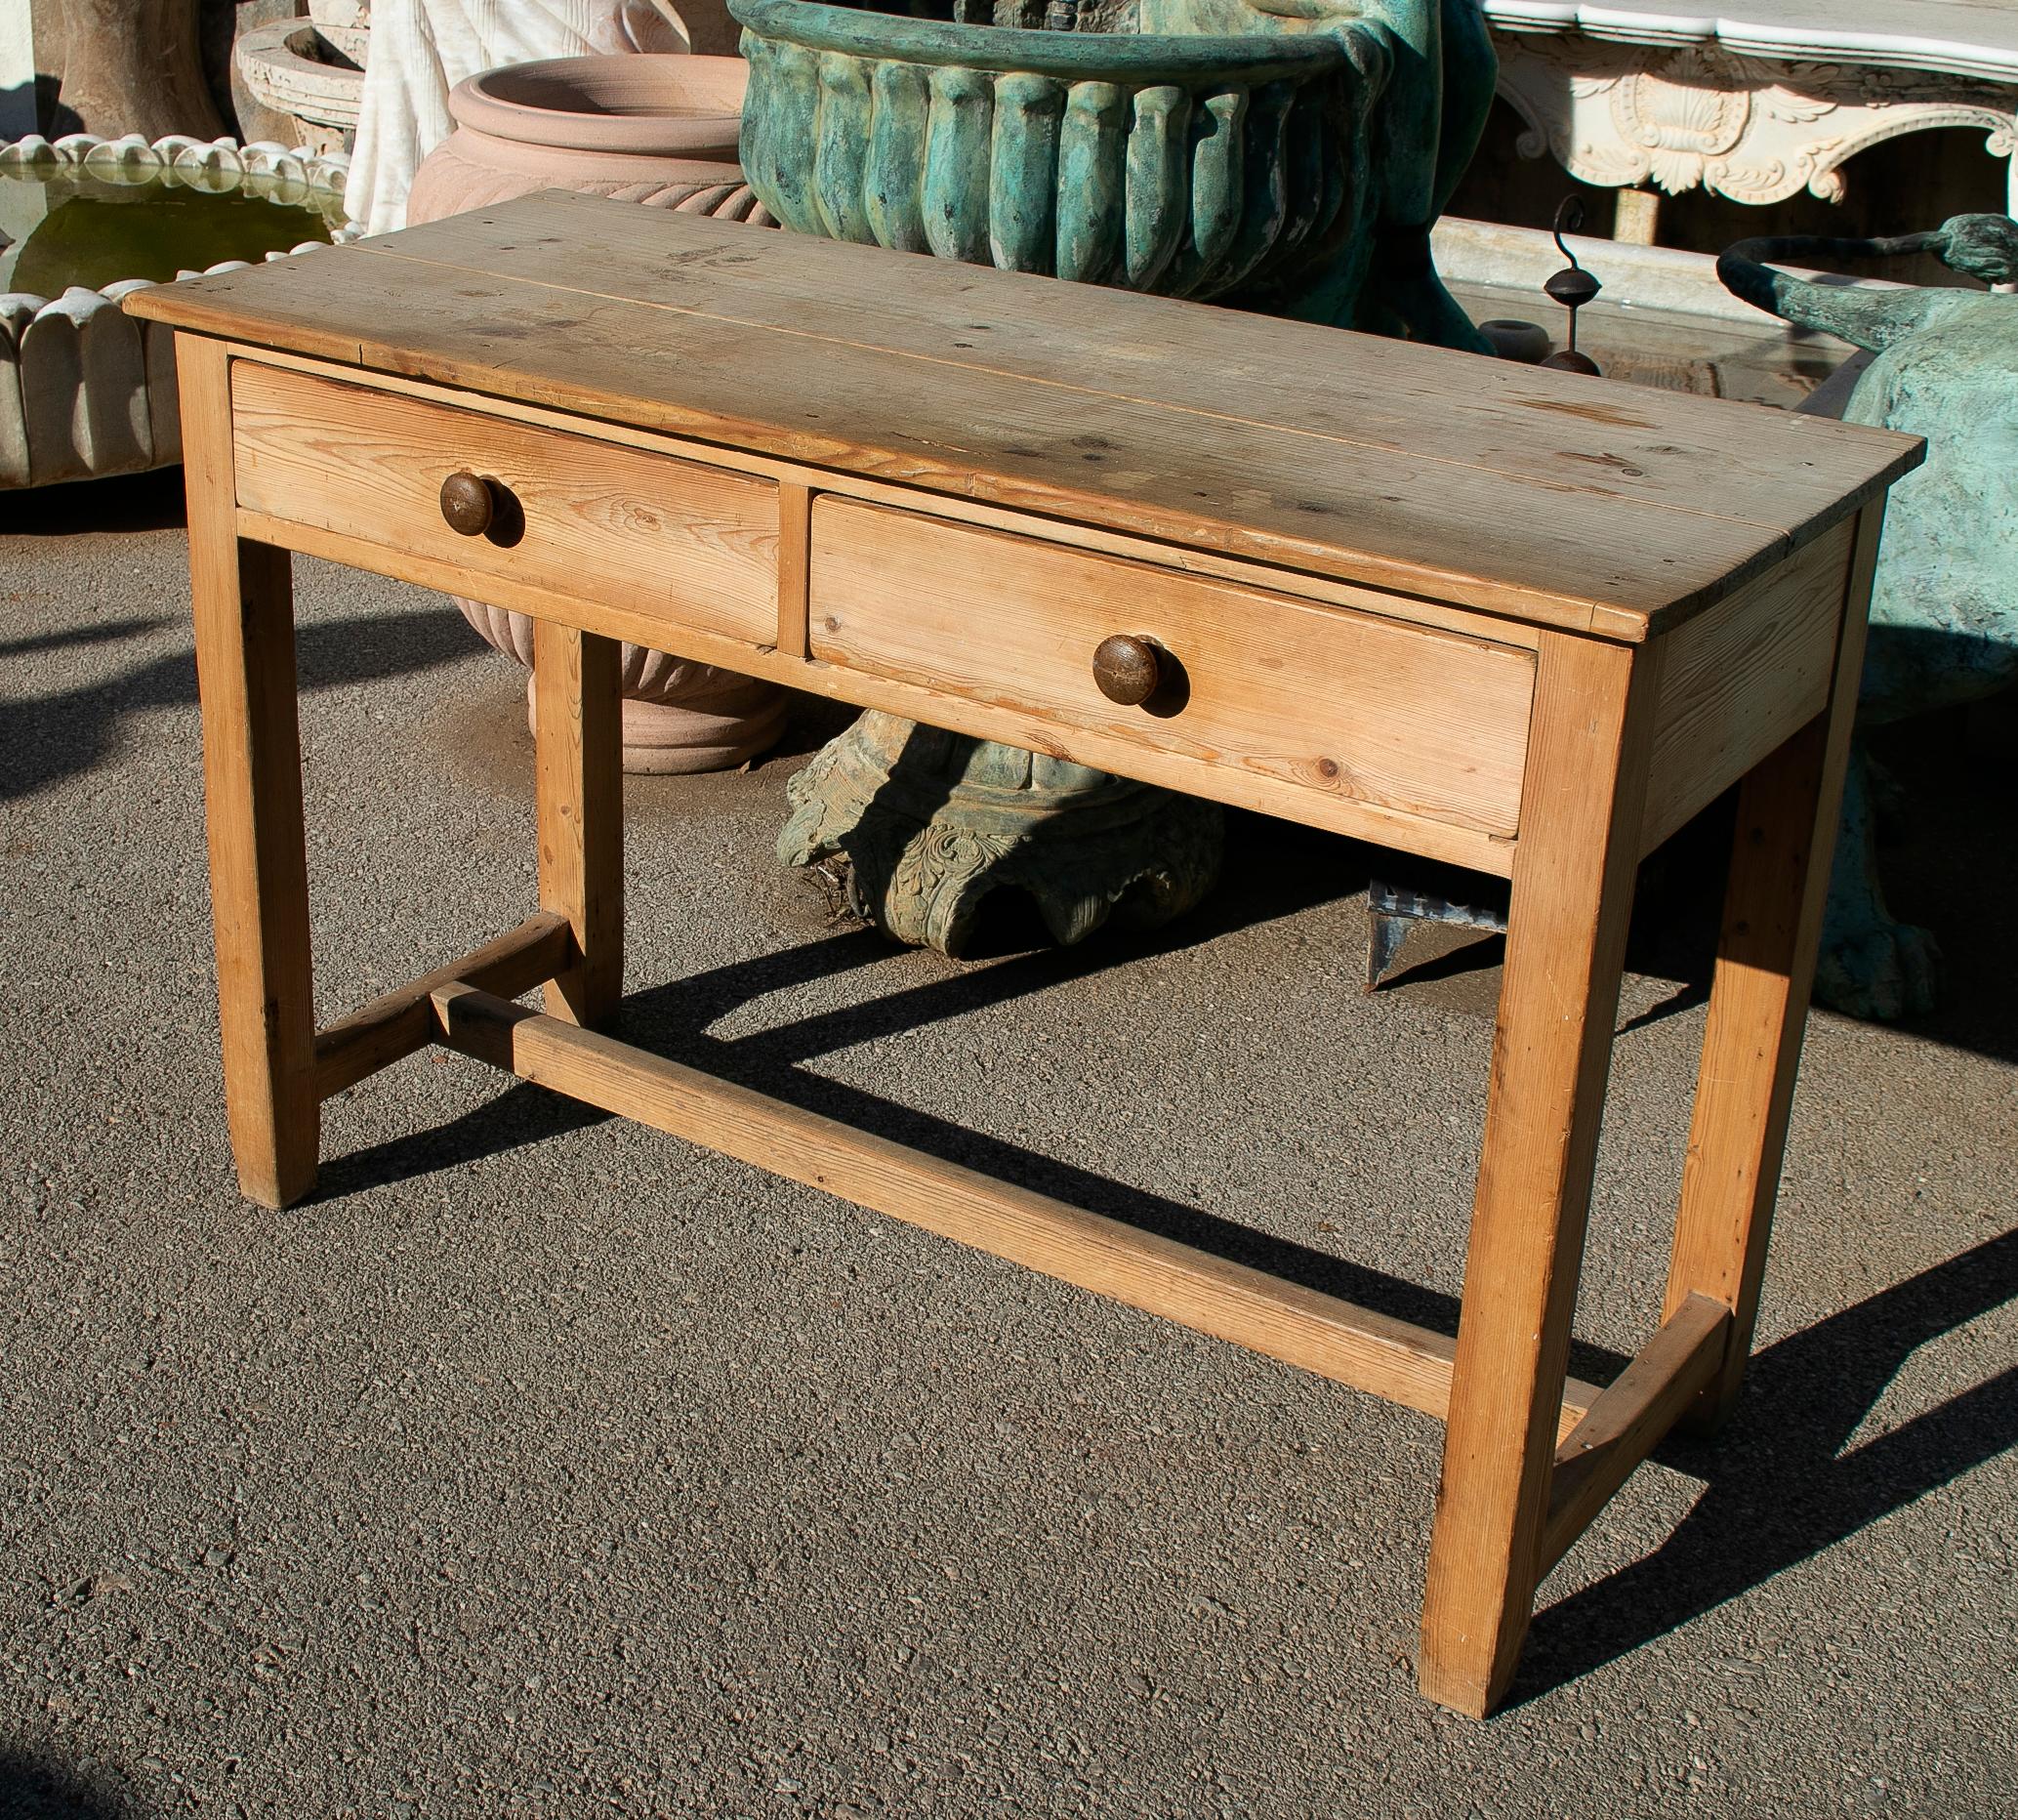 1920s Spanish rustic two-drawer country farm wooden table.